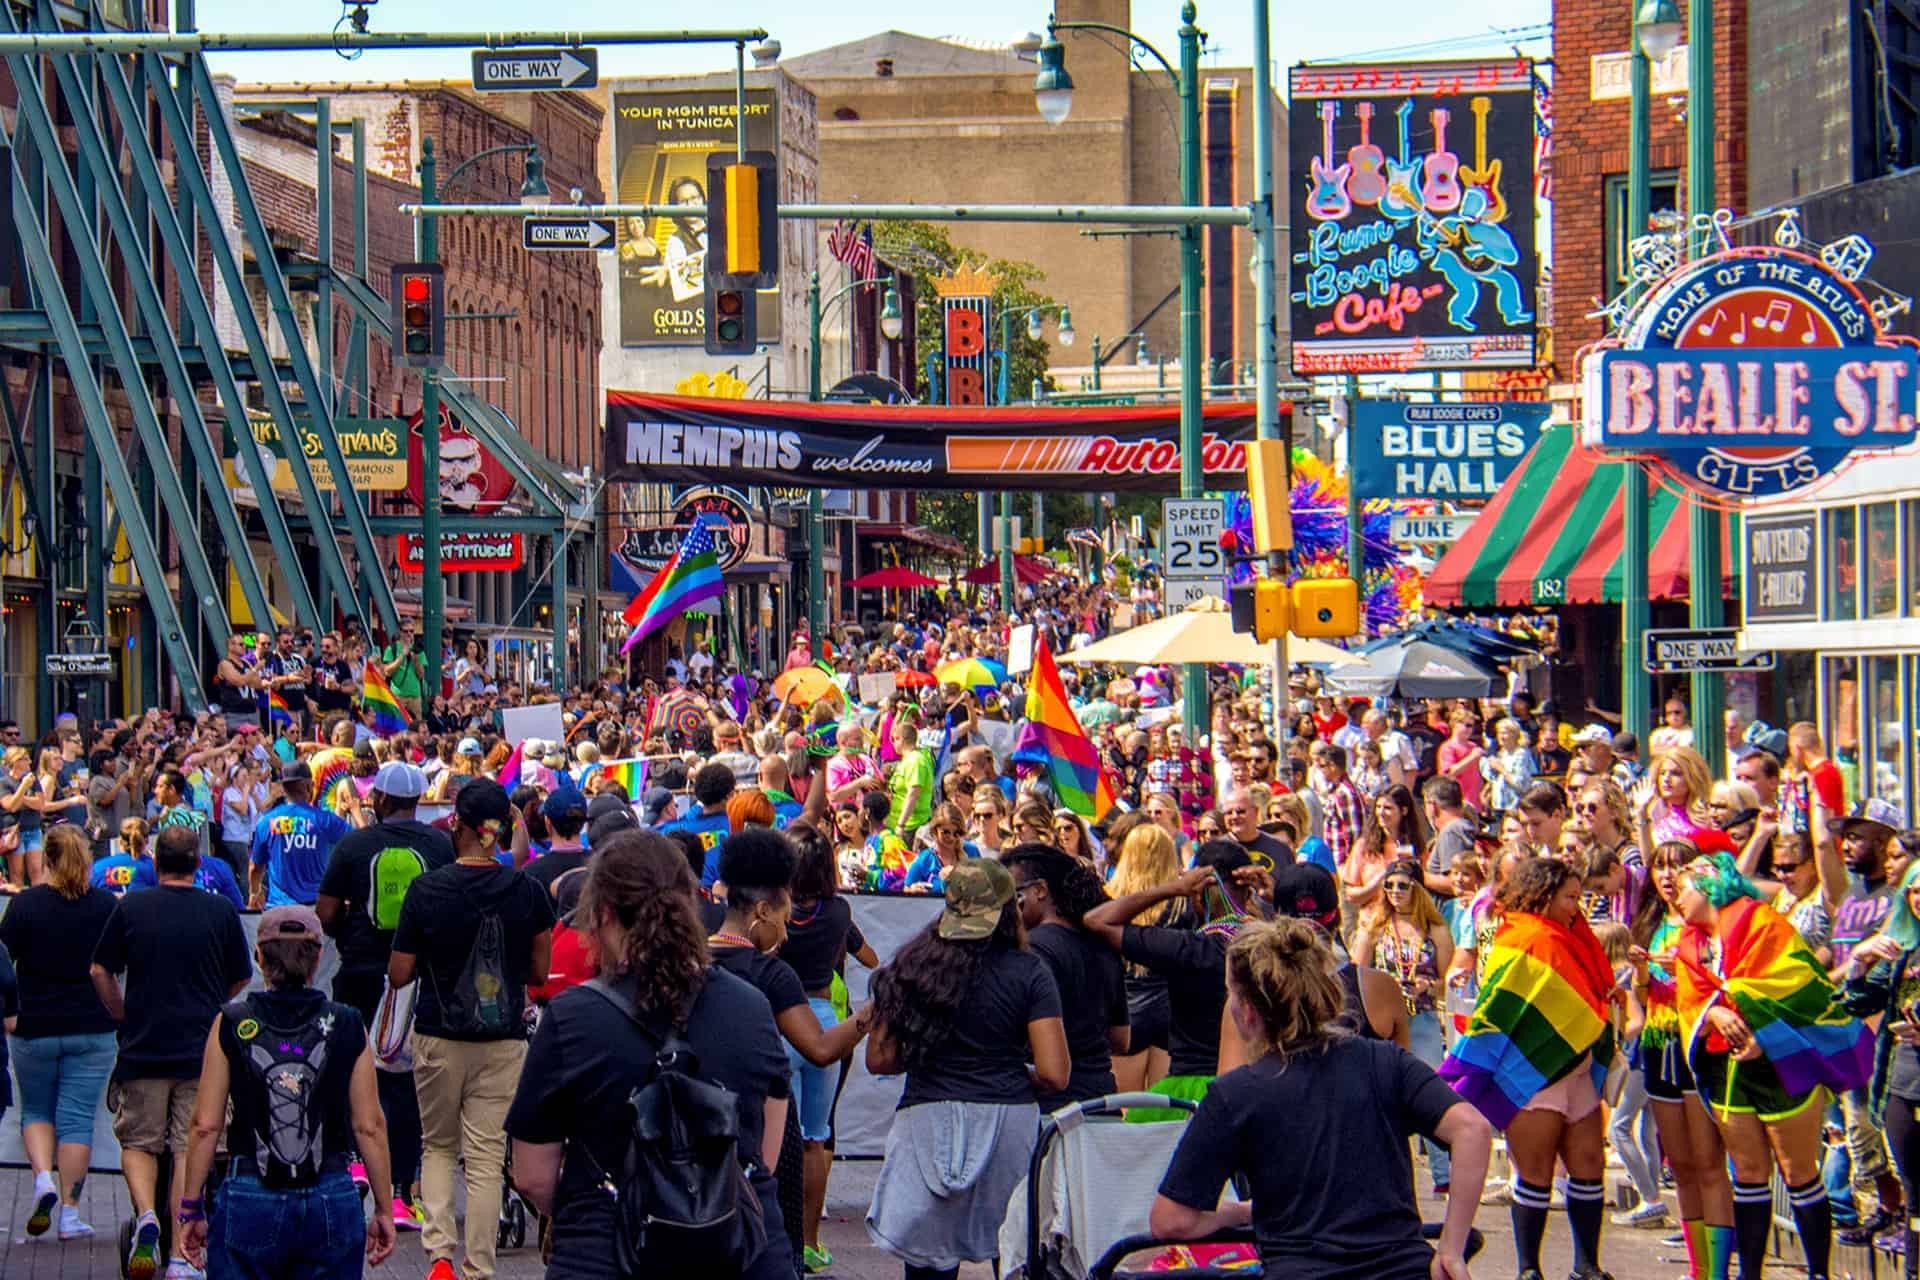 First gay pride parade in morristown tn image pic